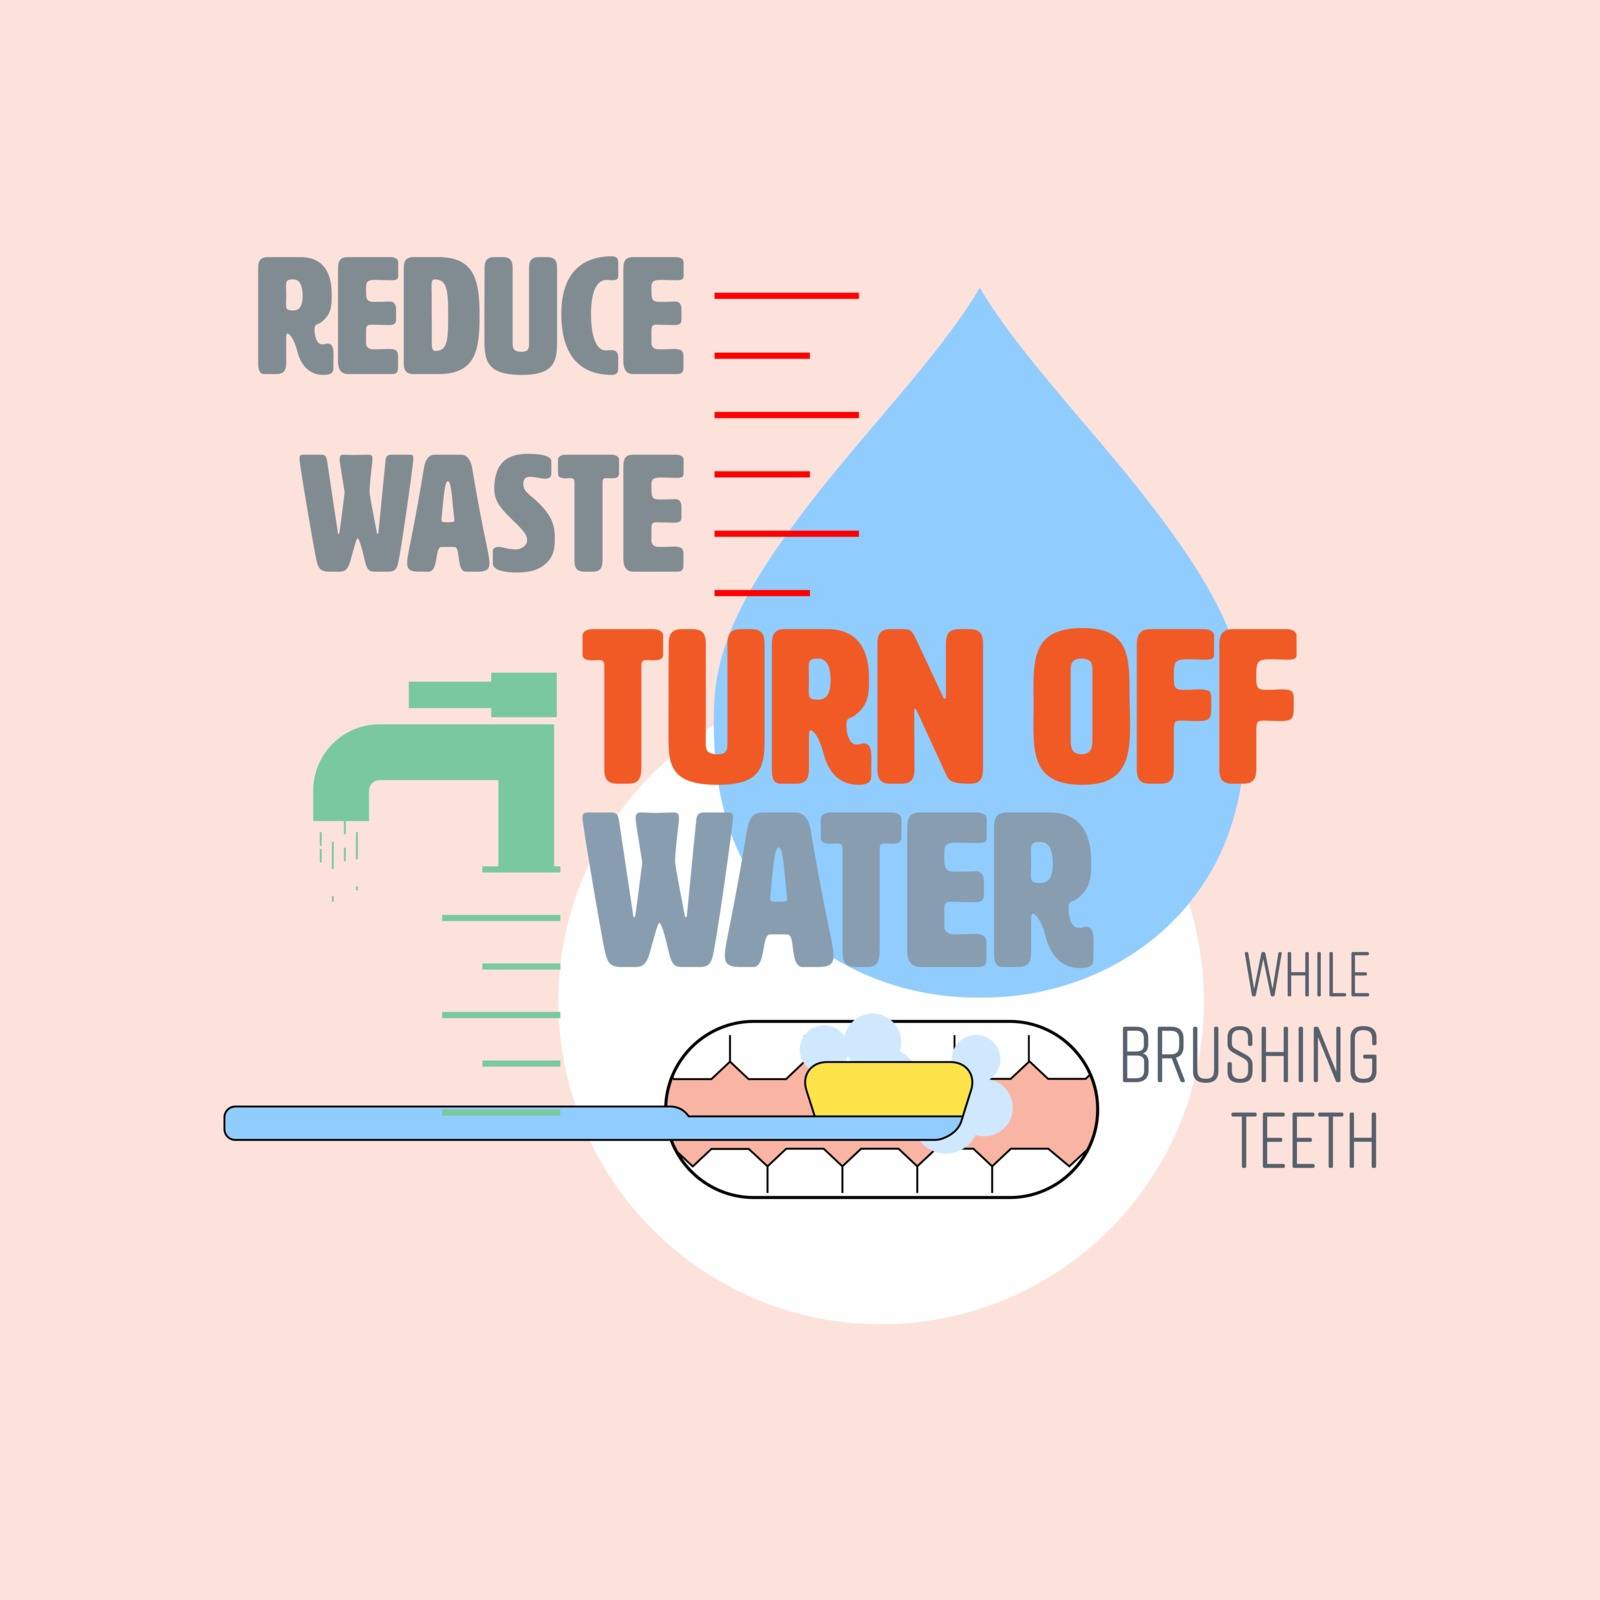 Turn off water typographic design with tap and water level icon as gimmicks. Reduce waste water concept. Vector illustration.